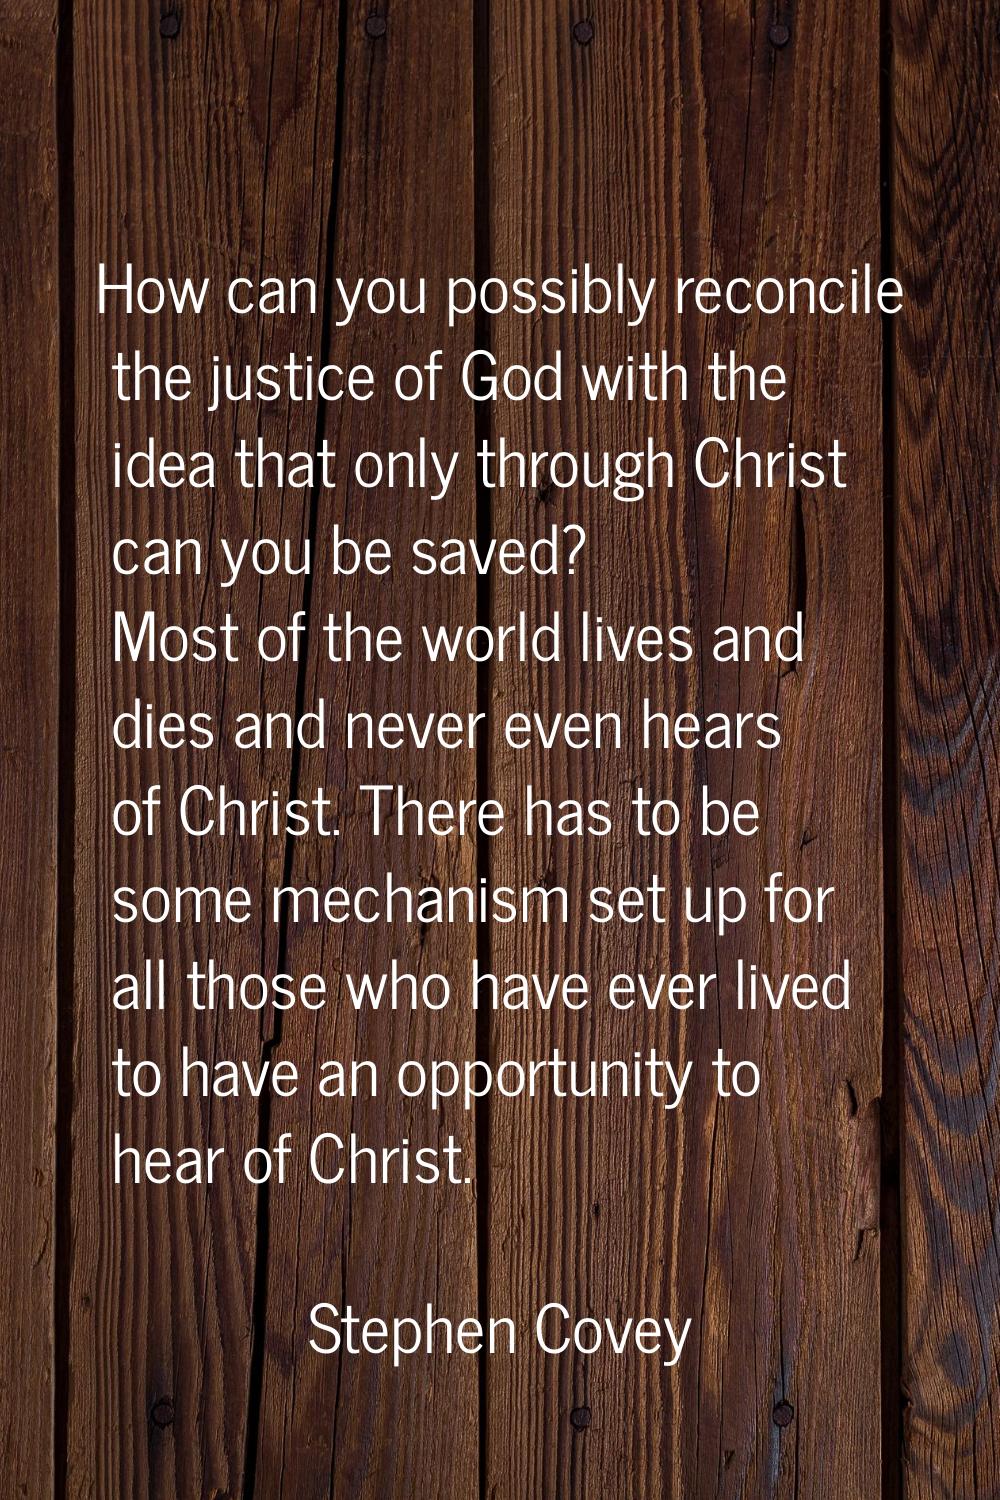 How can you possibly reconcile the justice of God with the idea that only through Christ can you be